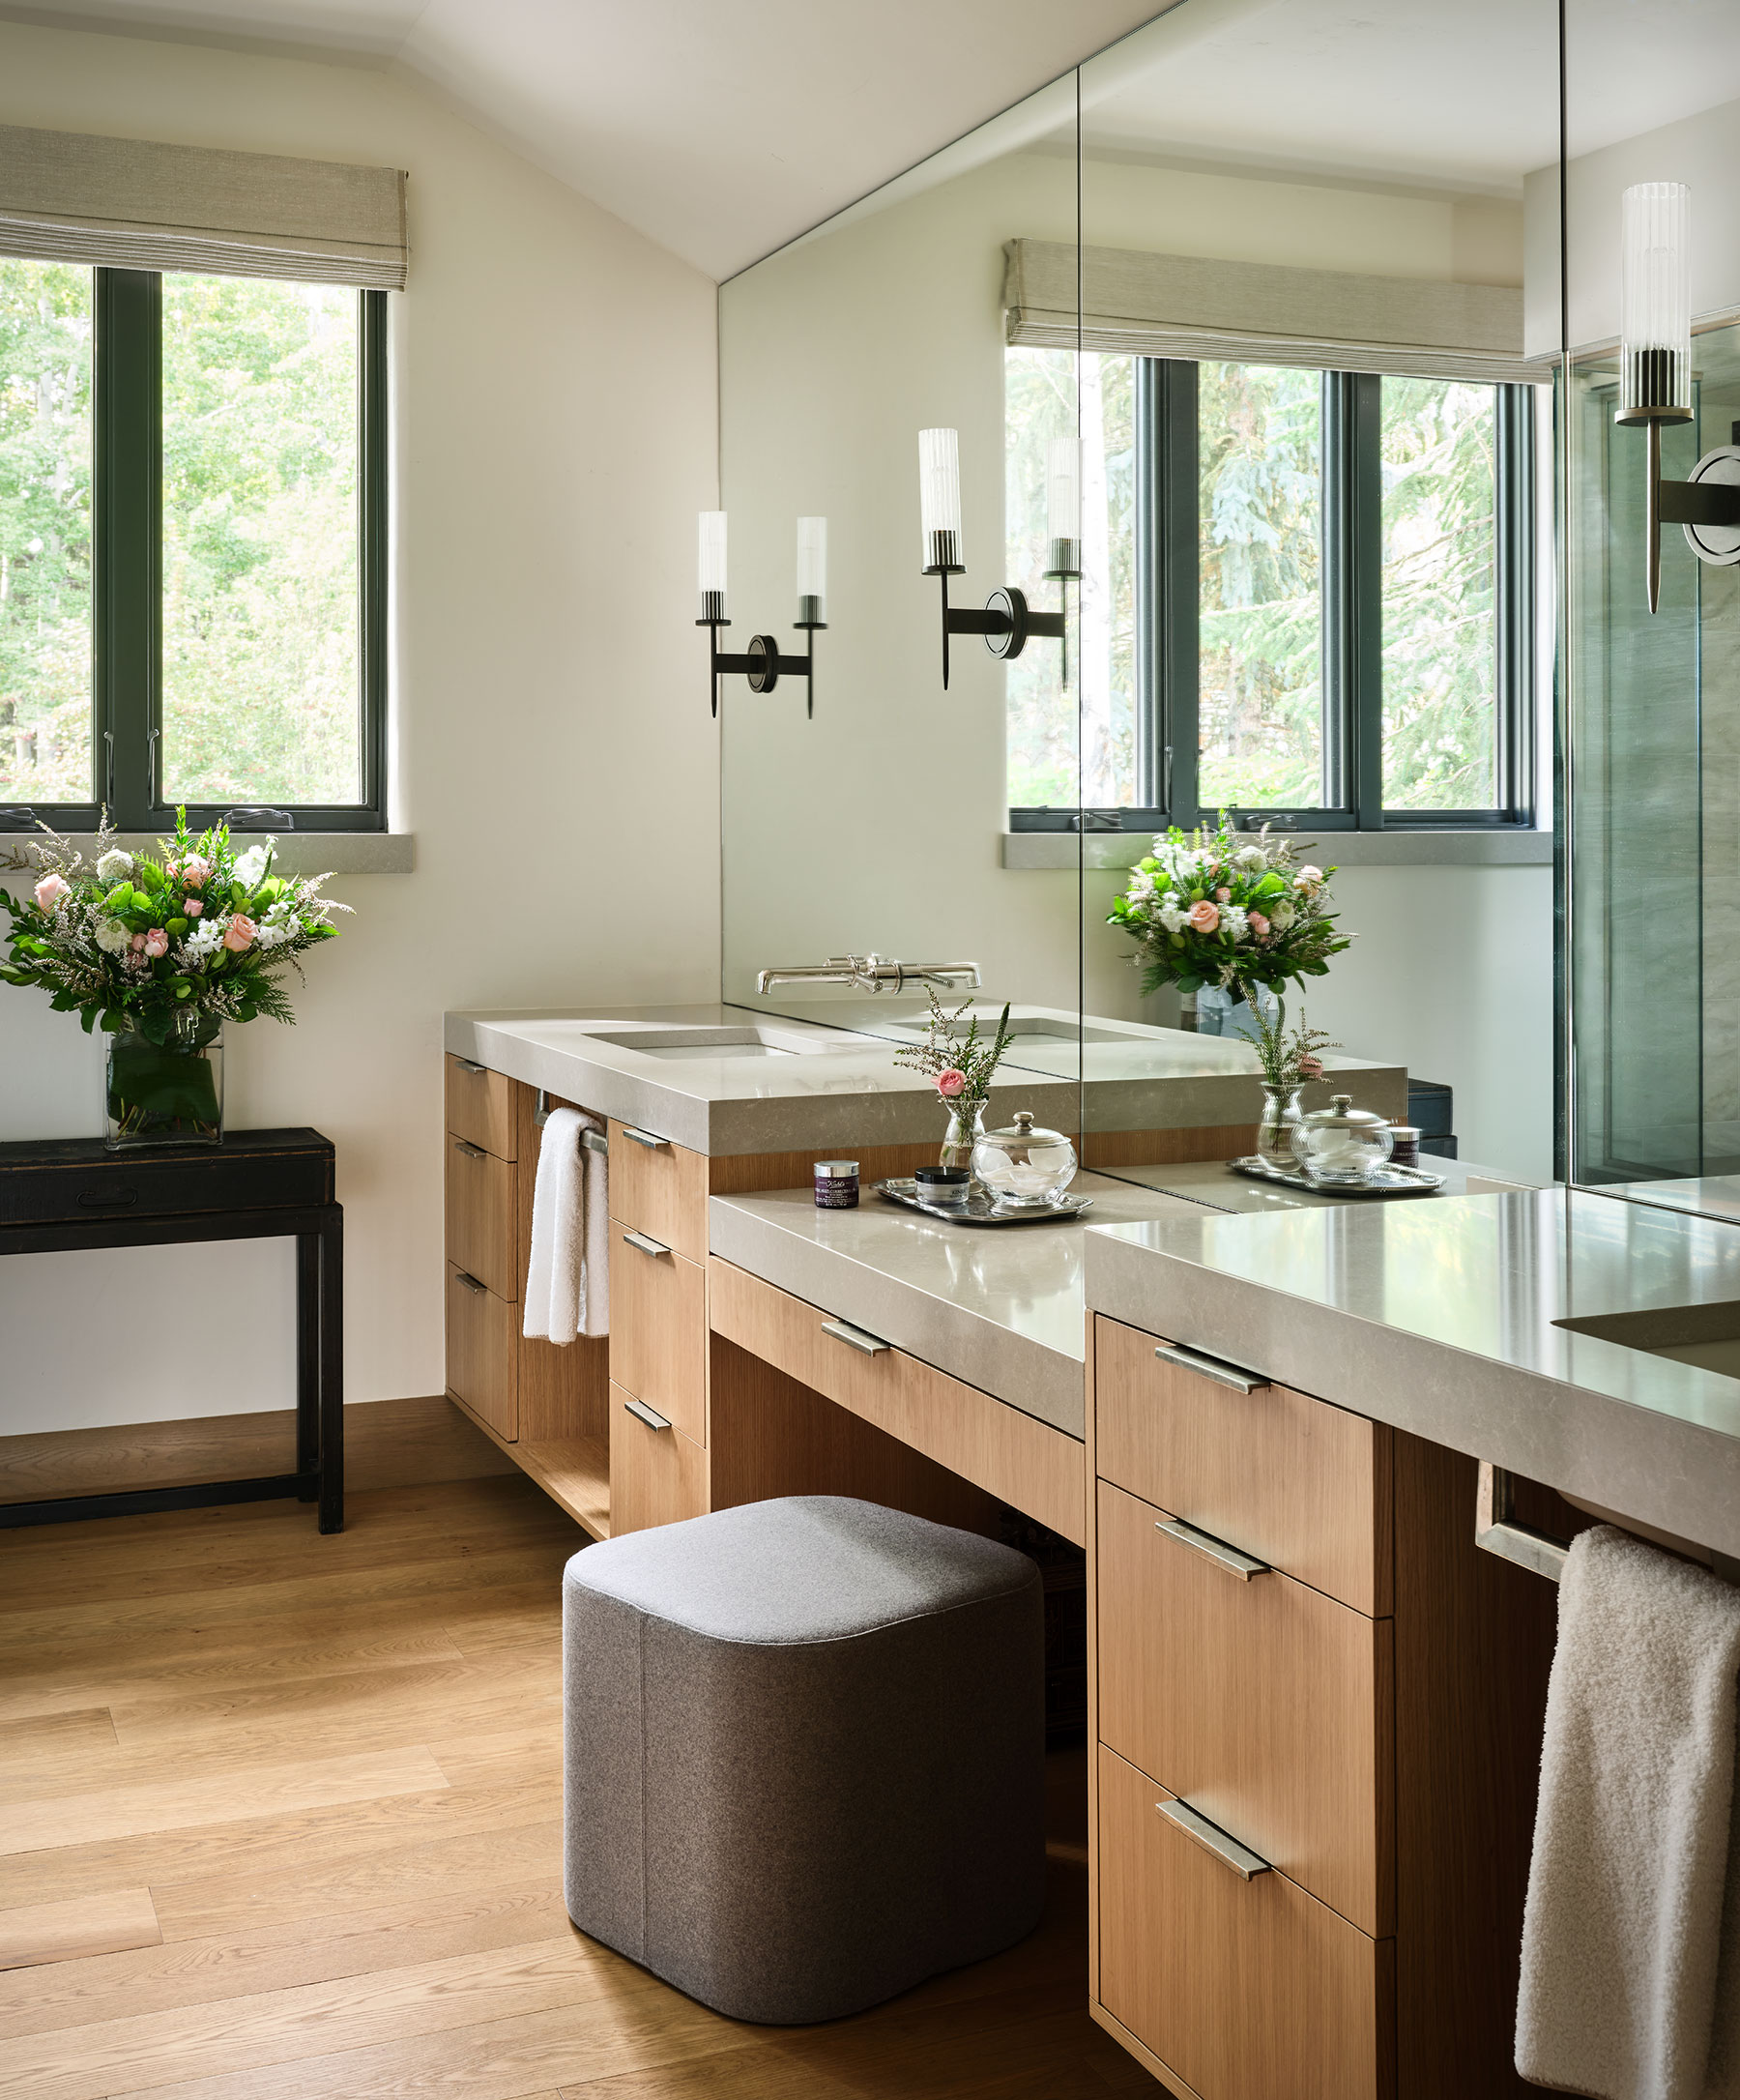 Modern bathroom with oak flooring, cabinets and quartz counters.